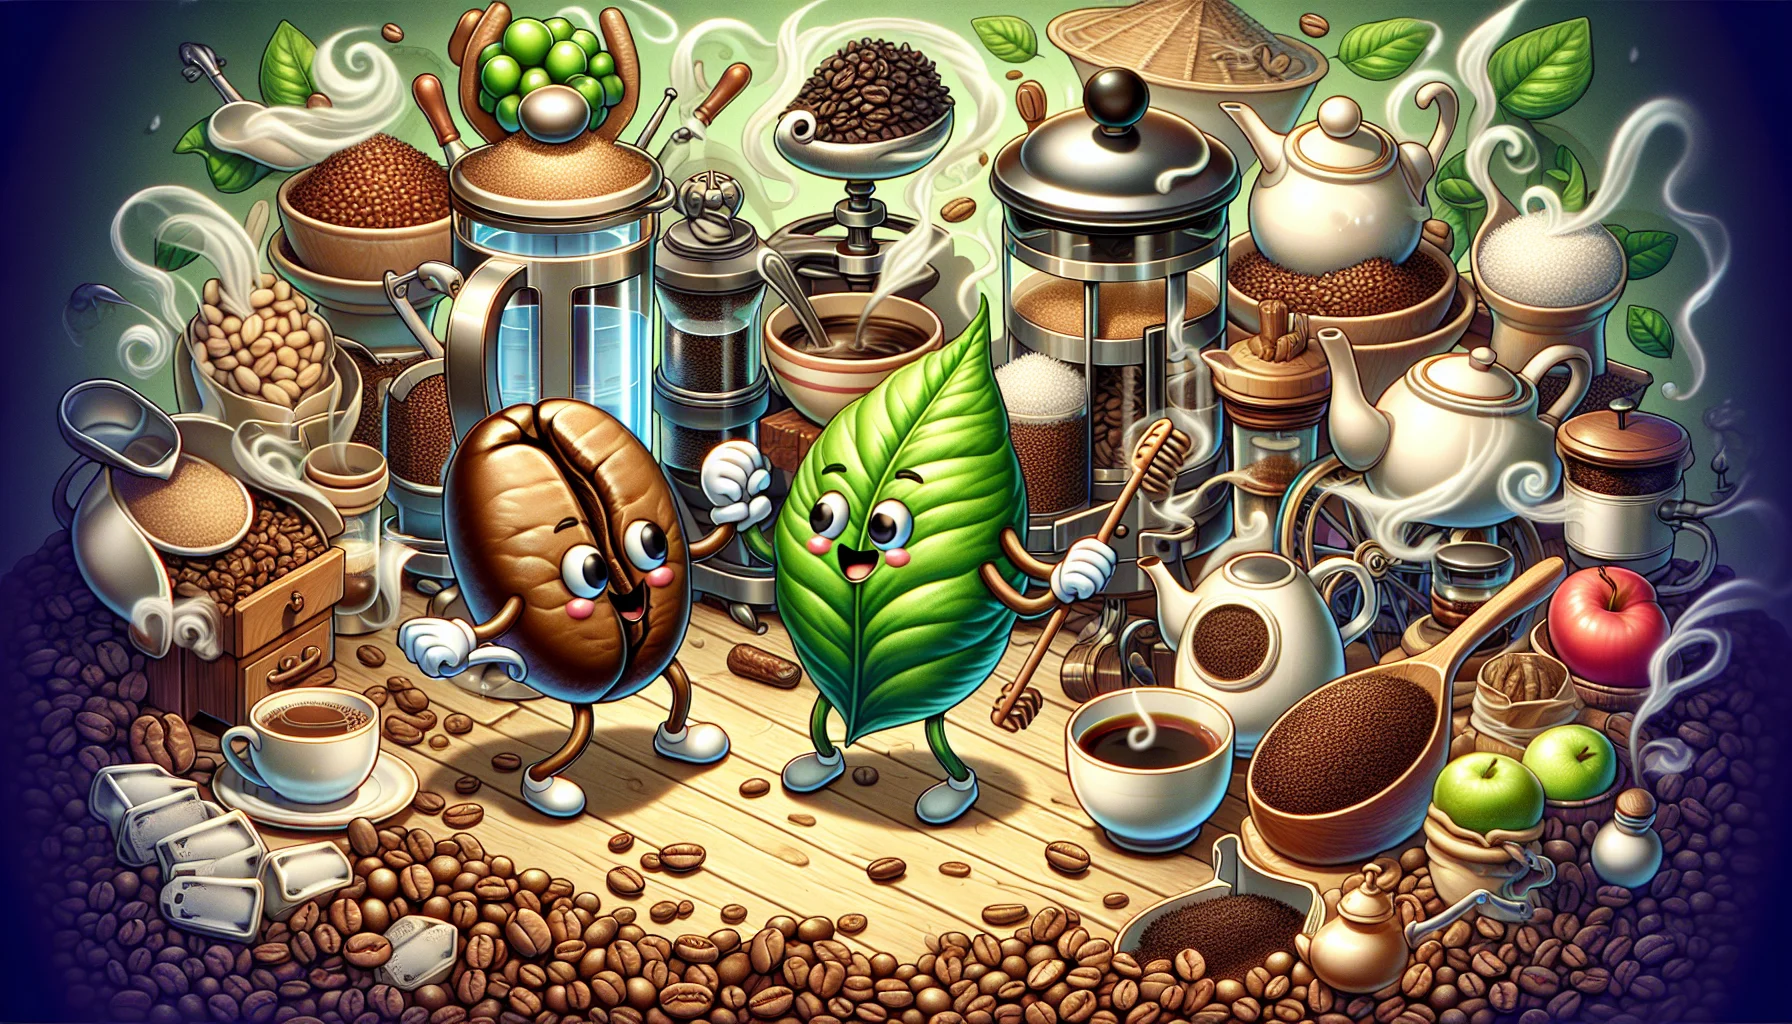 Generate a visual depiction of a whimsical and detailed scenario where a coffee bean and a tea leaf are seen in a playful interaction. The two prime ingredients of popular beverages seem to be enticing each other into a friendly brewing competition. Their surroundings are cluttered with a variety of brewing equipment such as a French press, a teapot, and an array of aromatic coffee and tea products. They have charming faces and appear to be having a grand time, making this scene irresistibly inviting for any tea or coffee connoisseur.